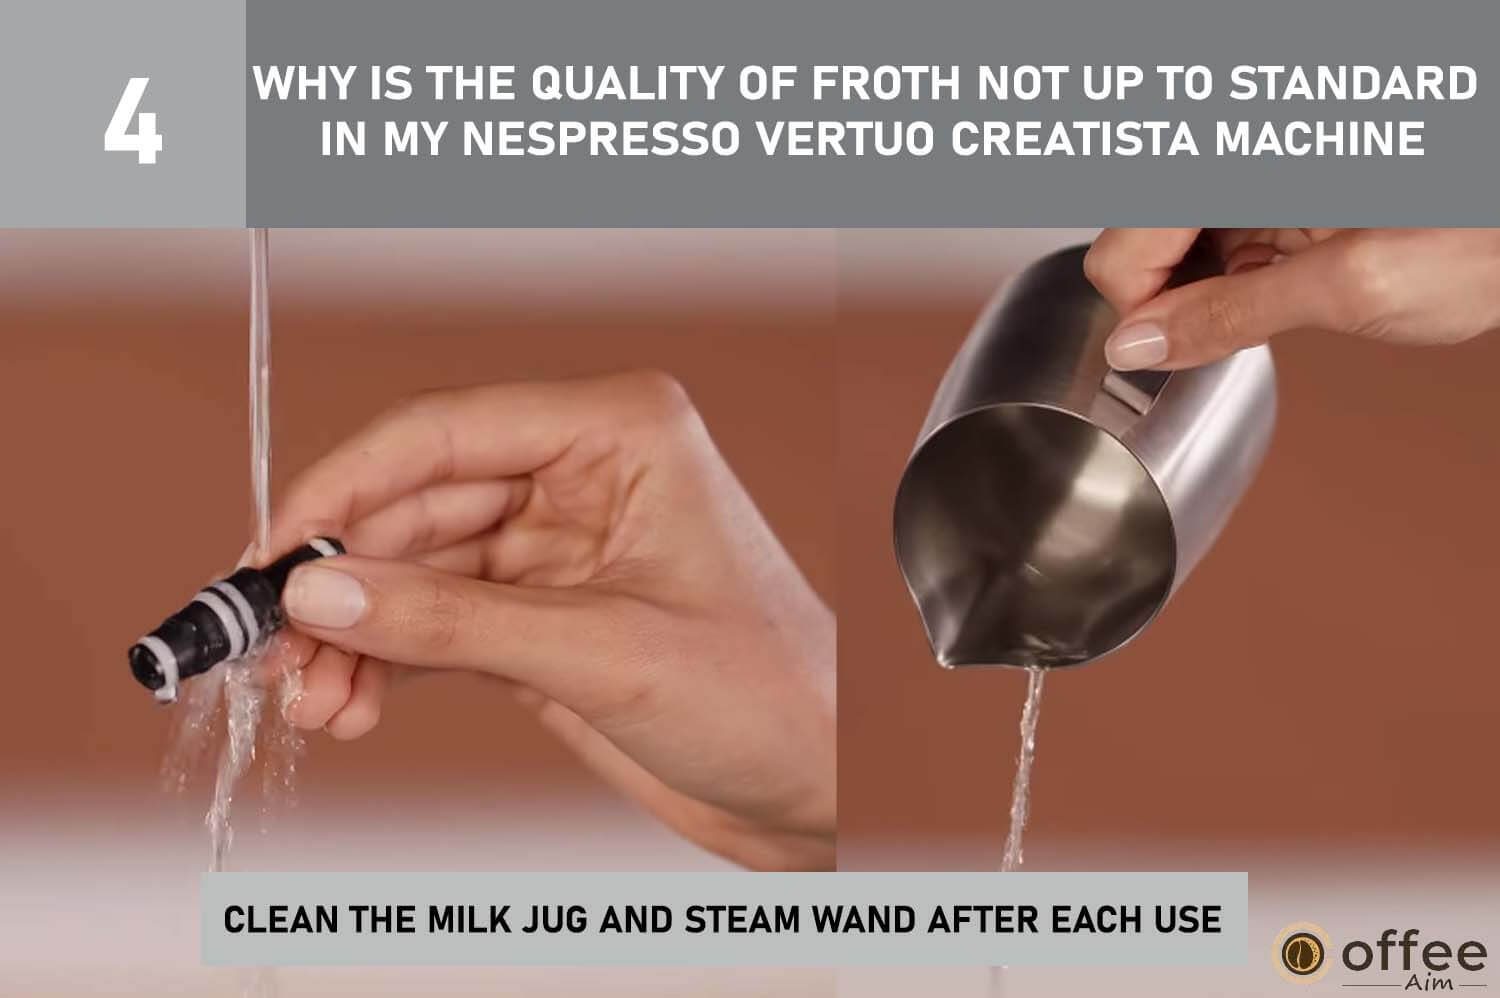 "Clean your Nespresso Vertuo Creatista milk jug and steam wand after every use for better froth quality. Follow instructions carefully."




